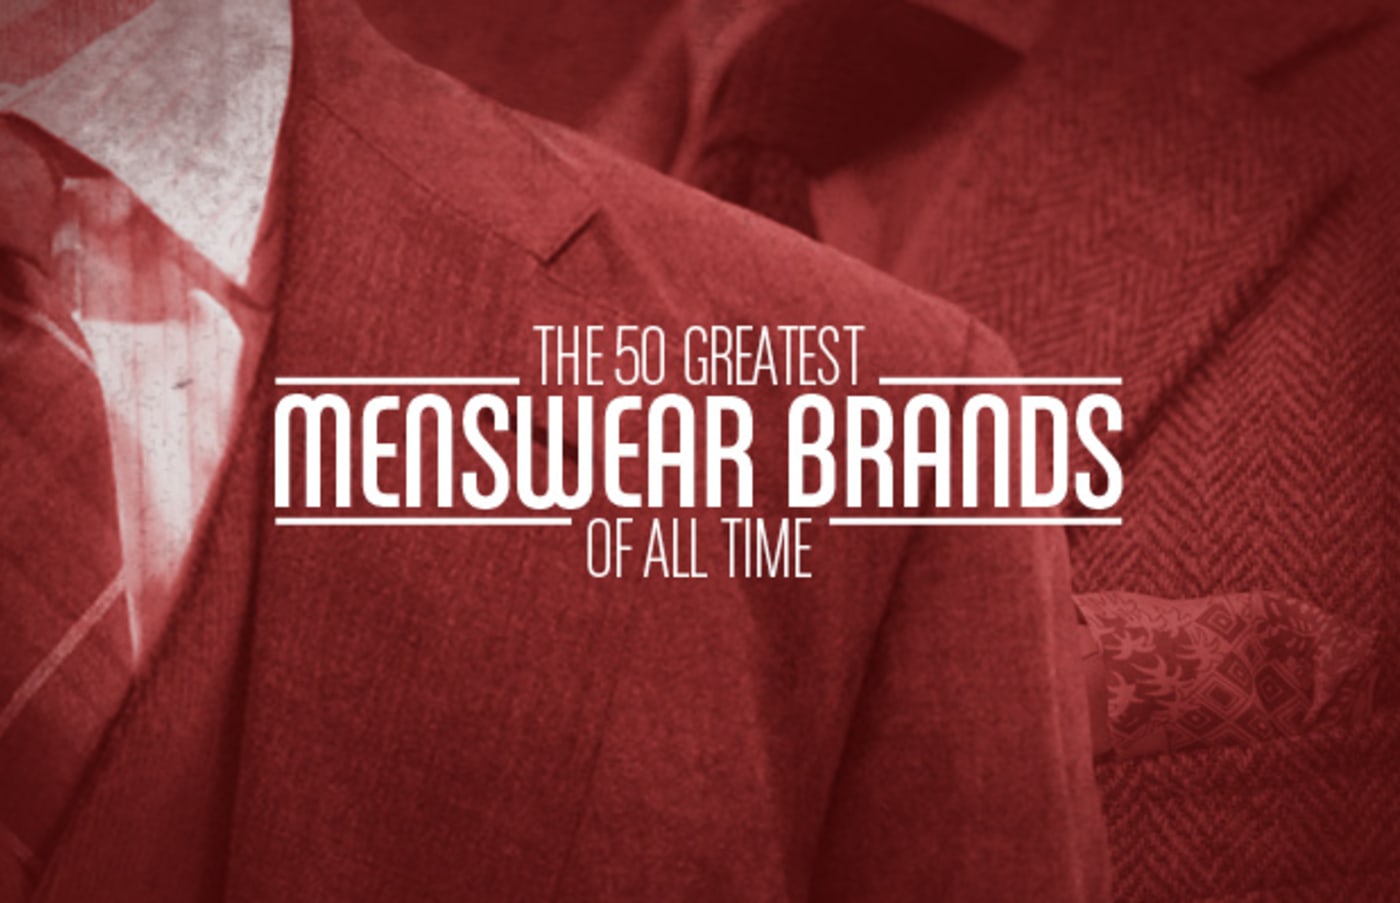 50 Greatest Mesnwear Brands of All Time